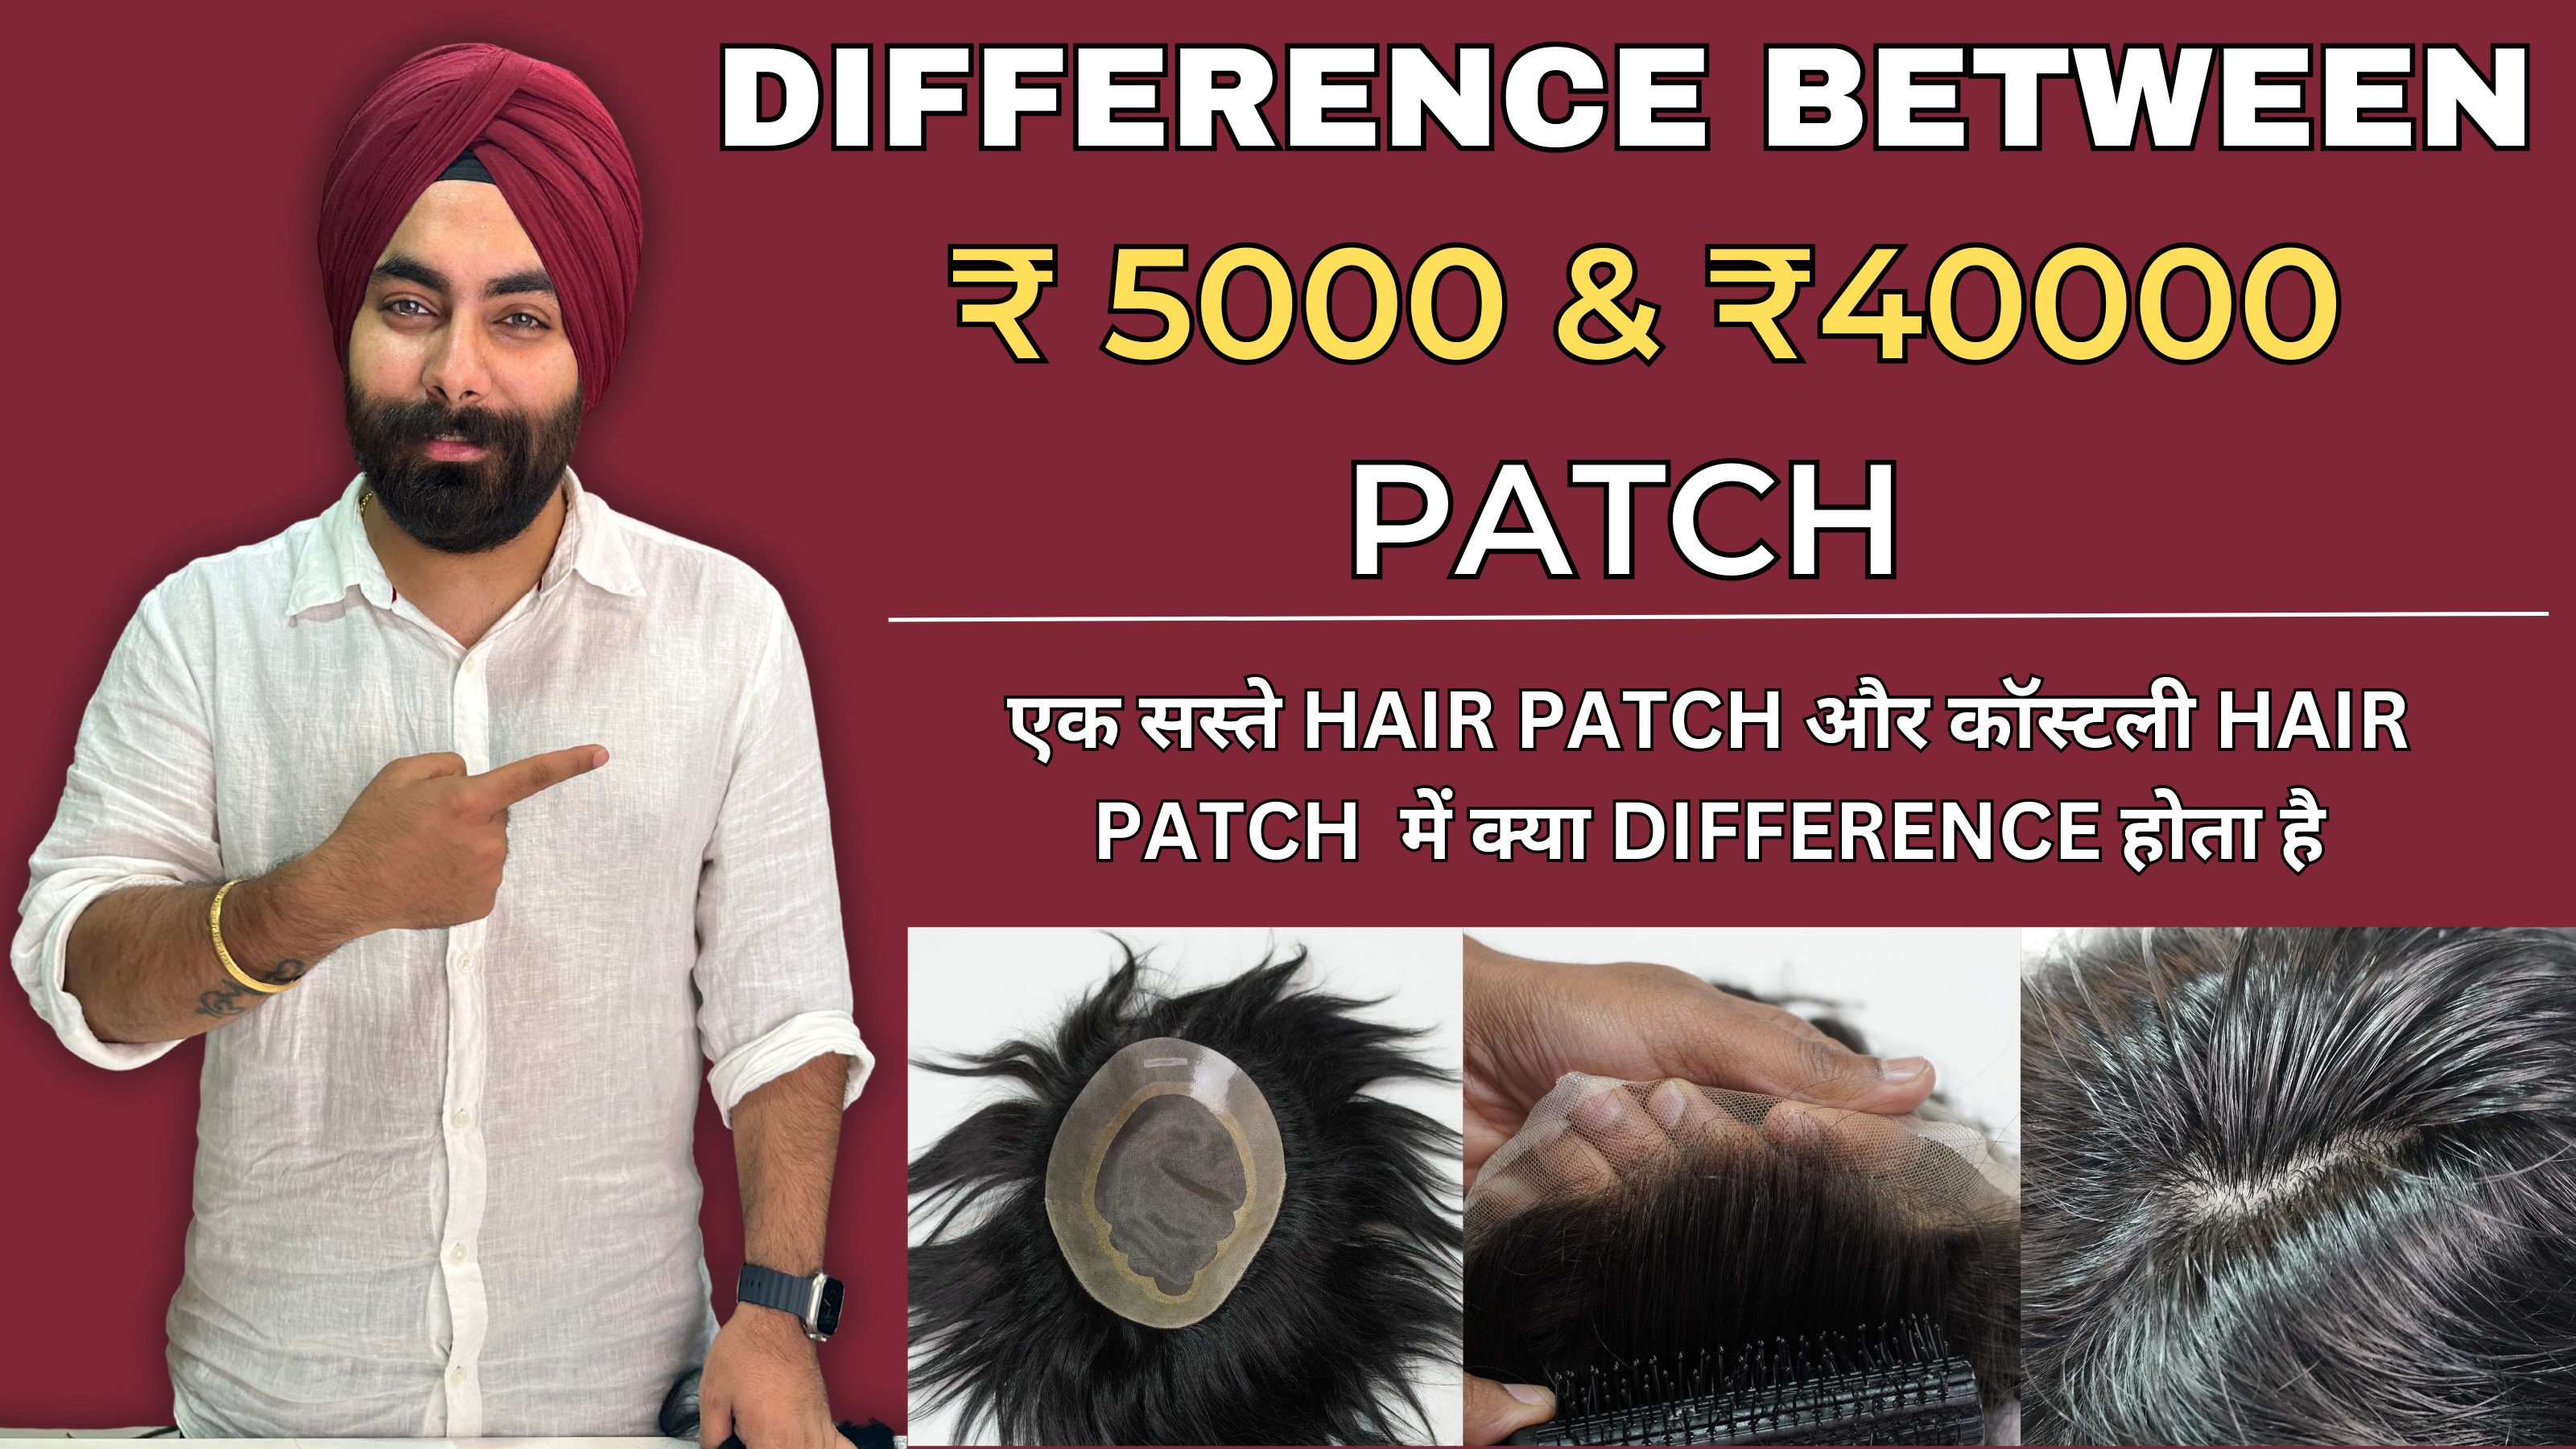 Hair Wig | Hair Patch | Hair Fixing Lucknow | Wig Shop In Lucknow |  9569199728 - YouTube